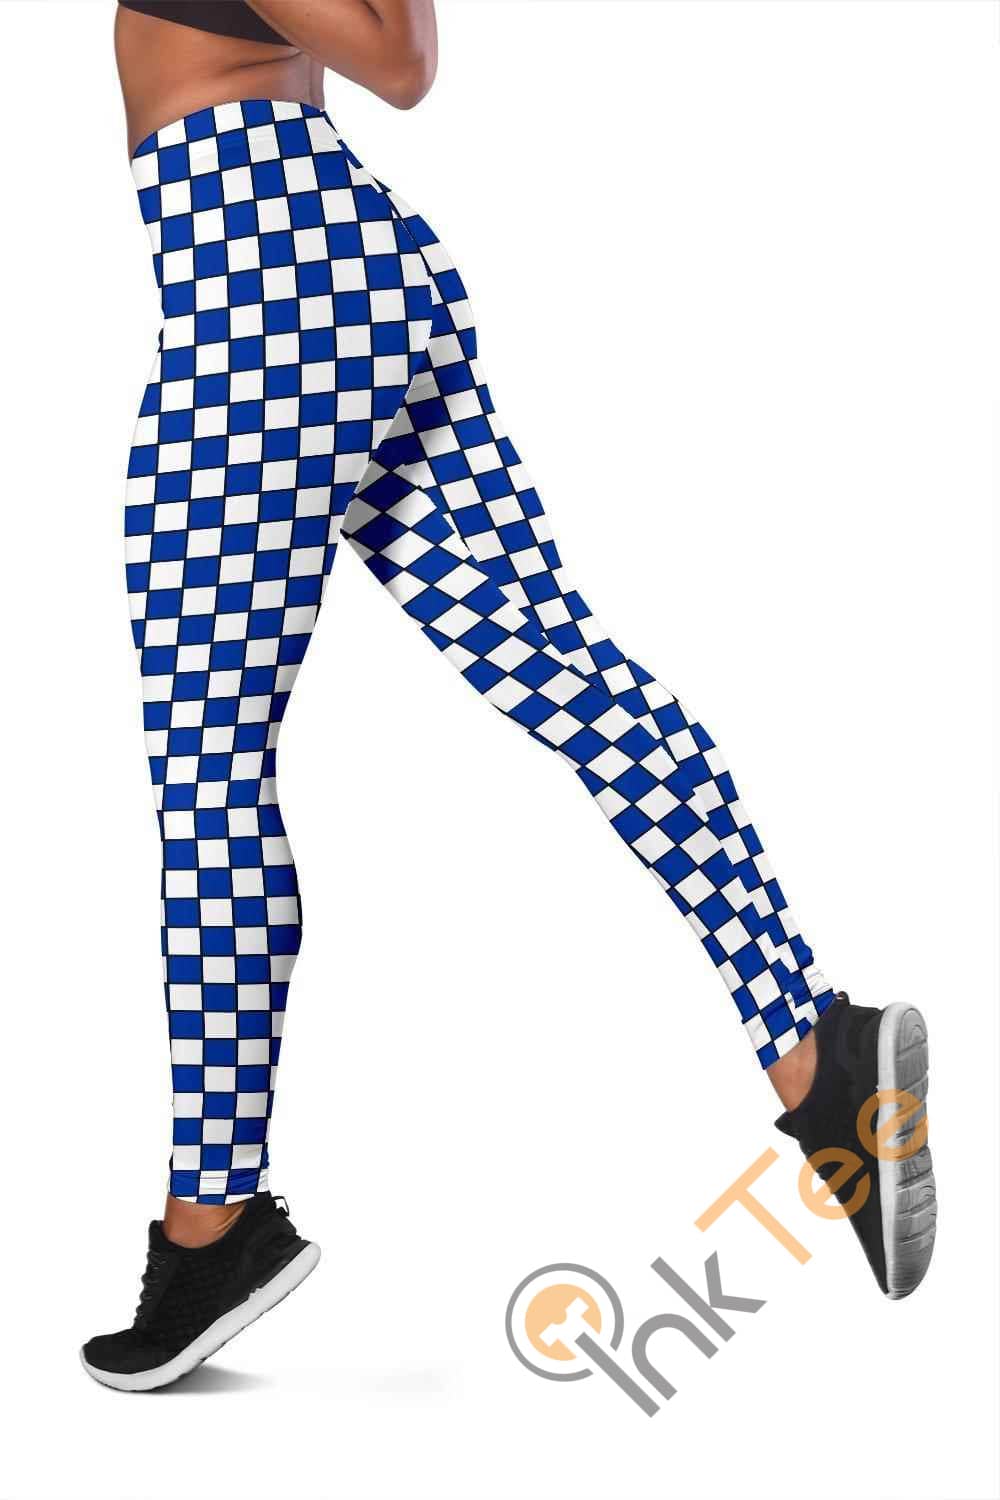 Inktee Store - Kentucky Wildcats Fan Inspired 3D All Over Print For Yoga Fitness Checkers Women'S Leggings Image